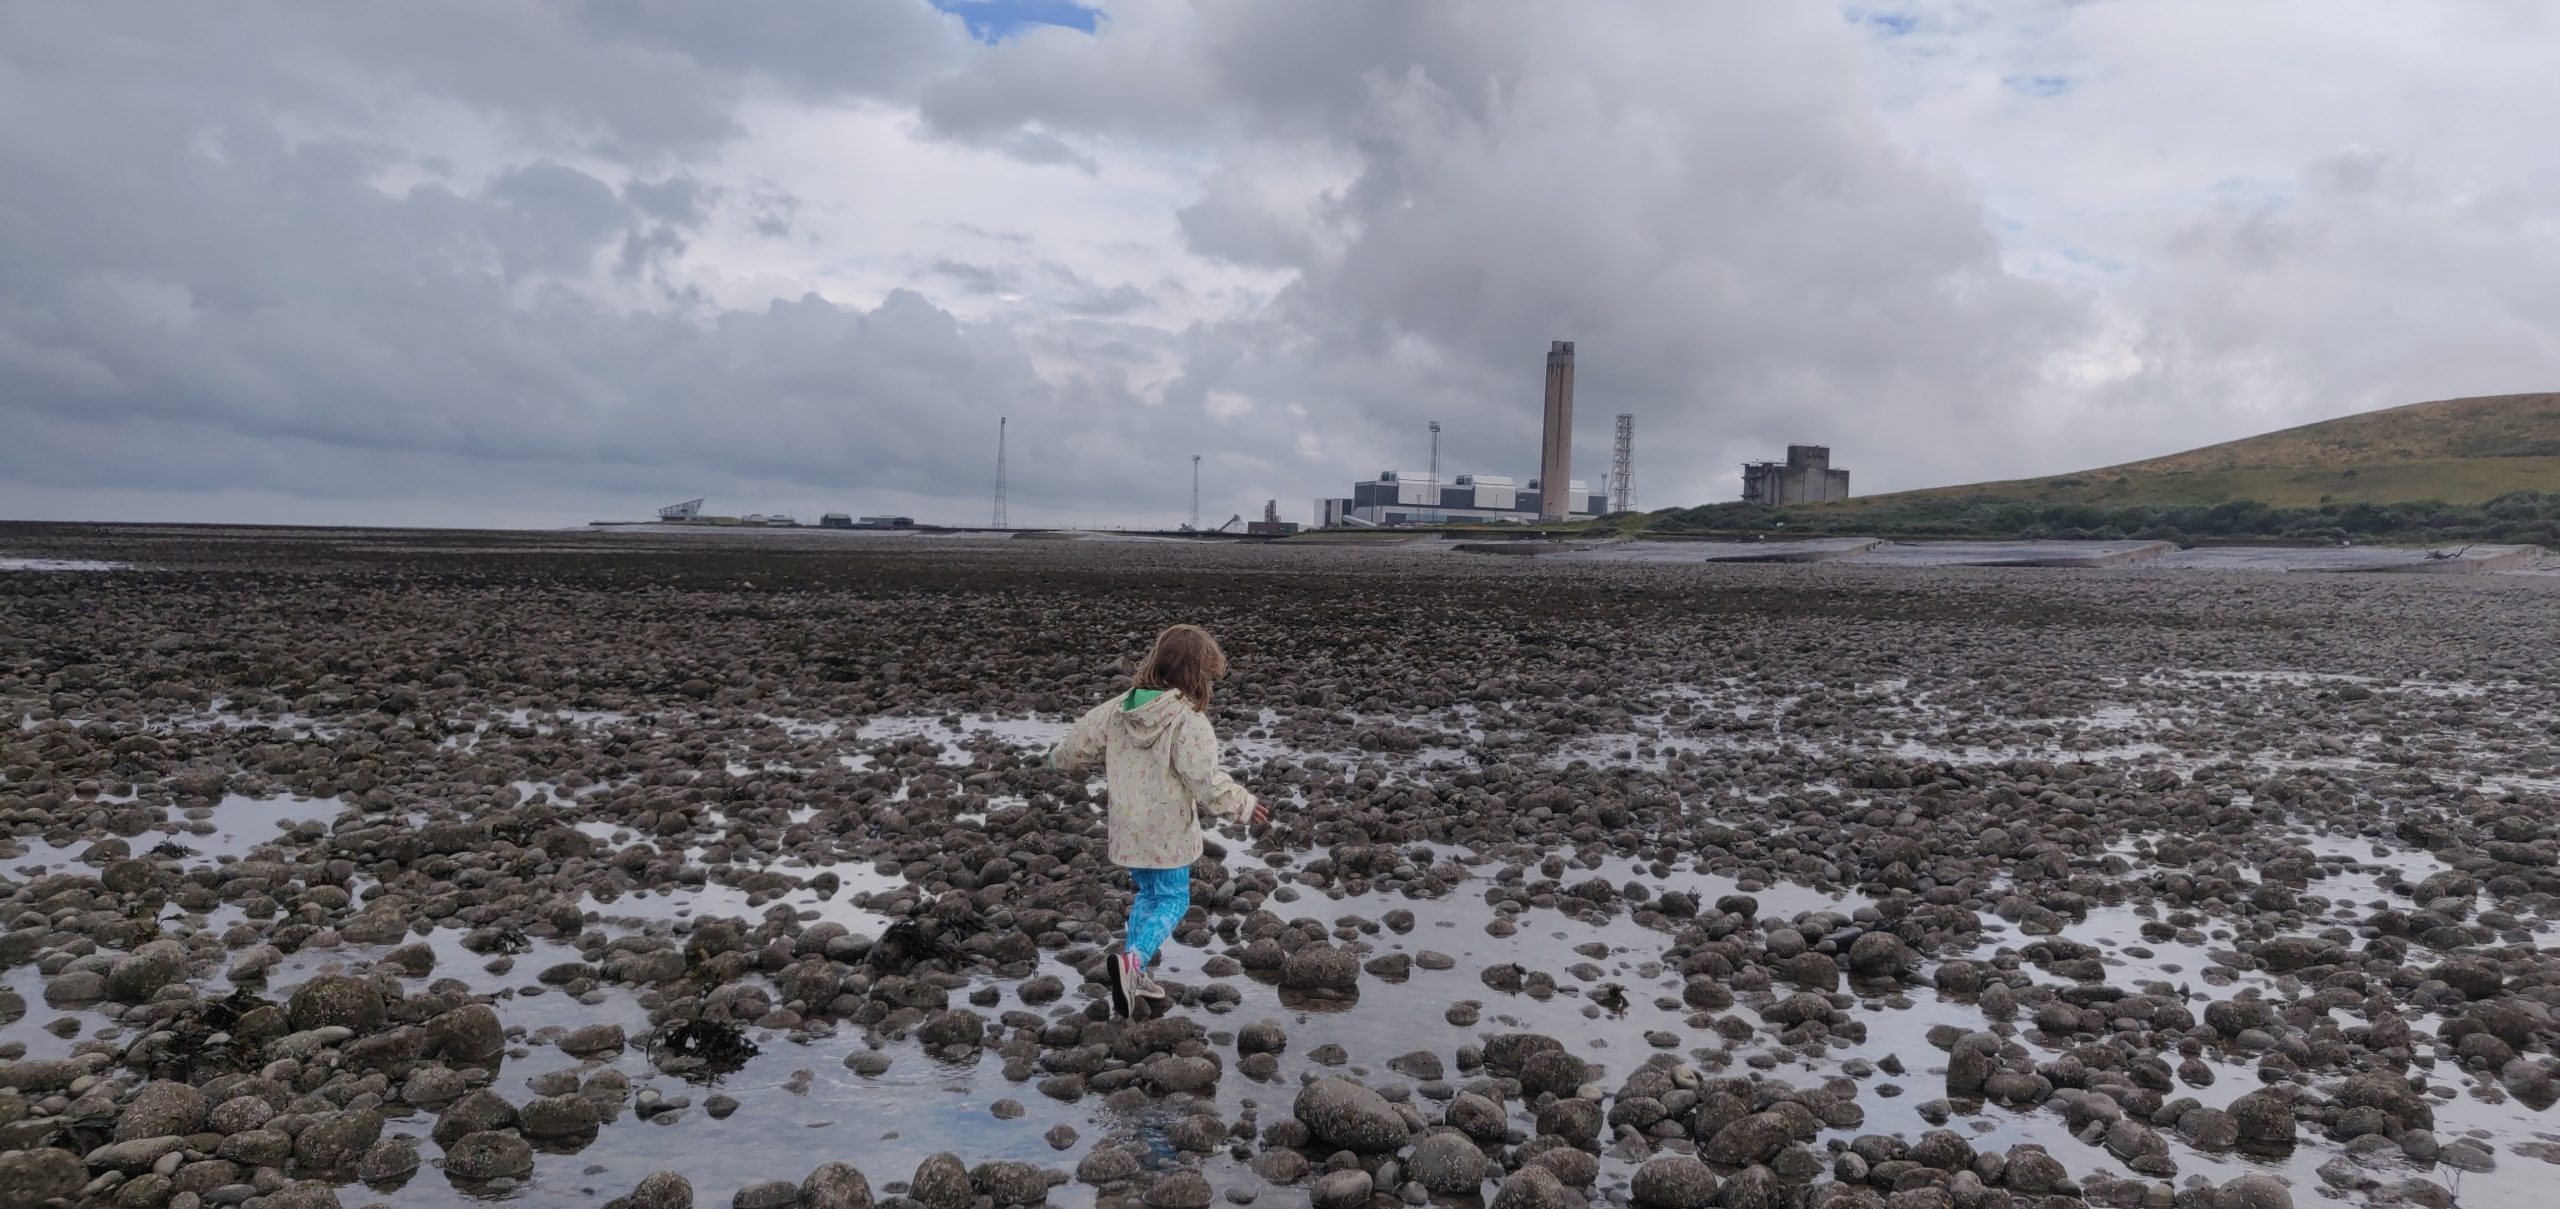 Girl walking on a stony beach with a power station behind